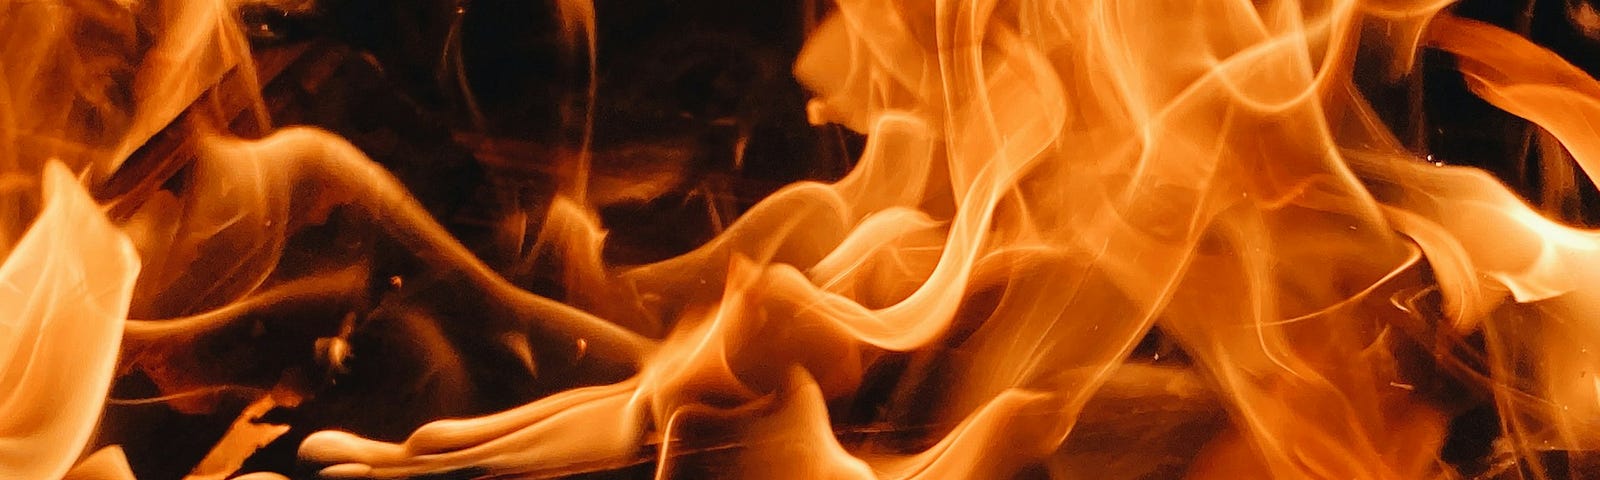 Close shot of intense orange flames contrasted by black embers